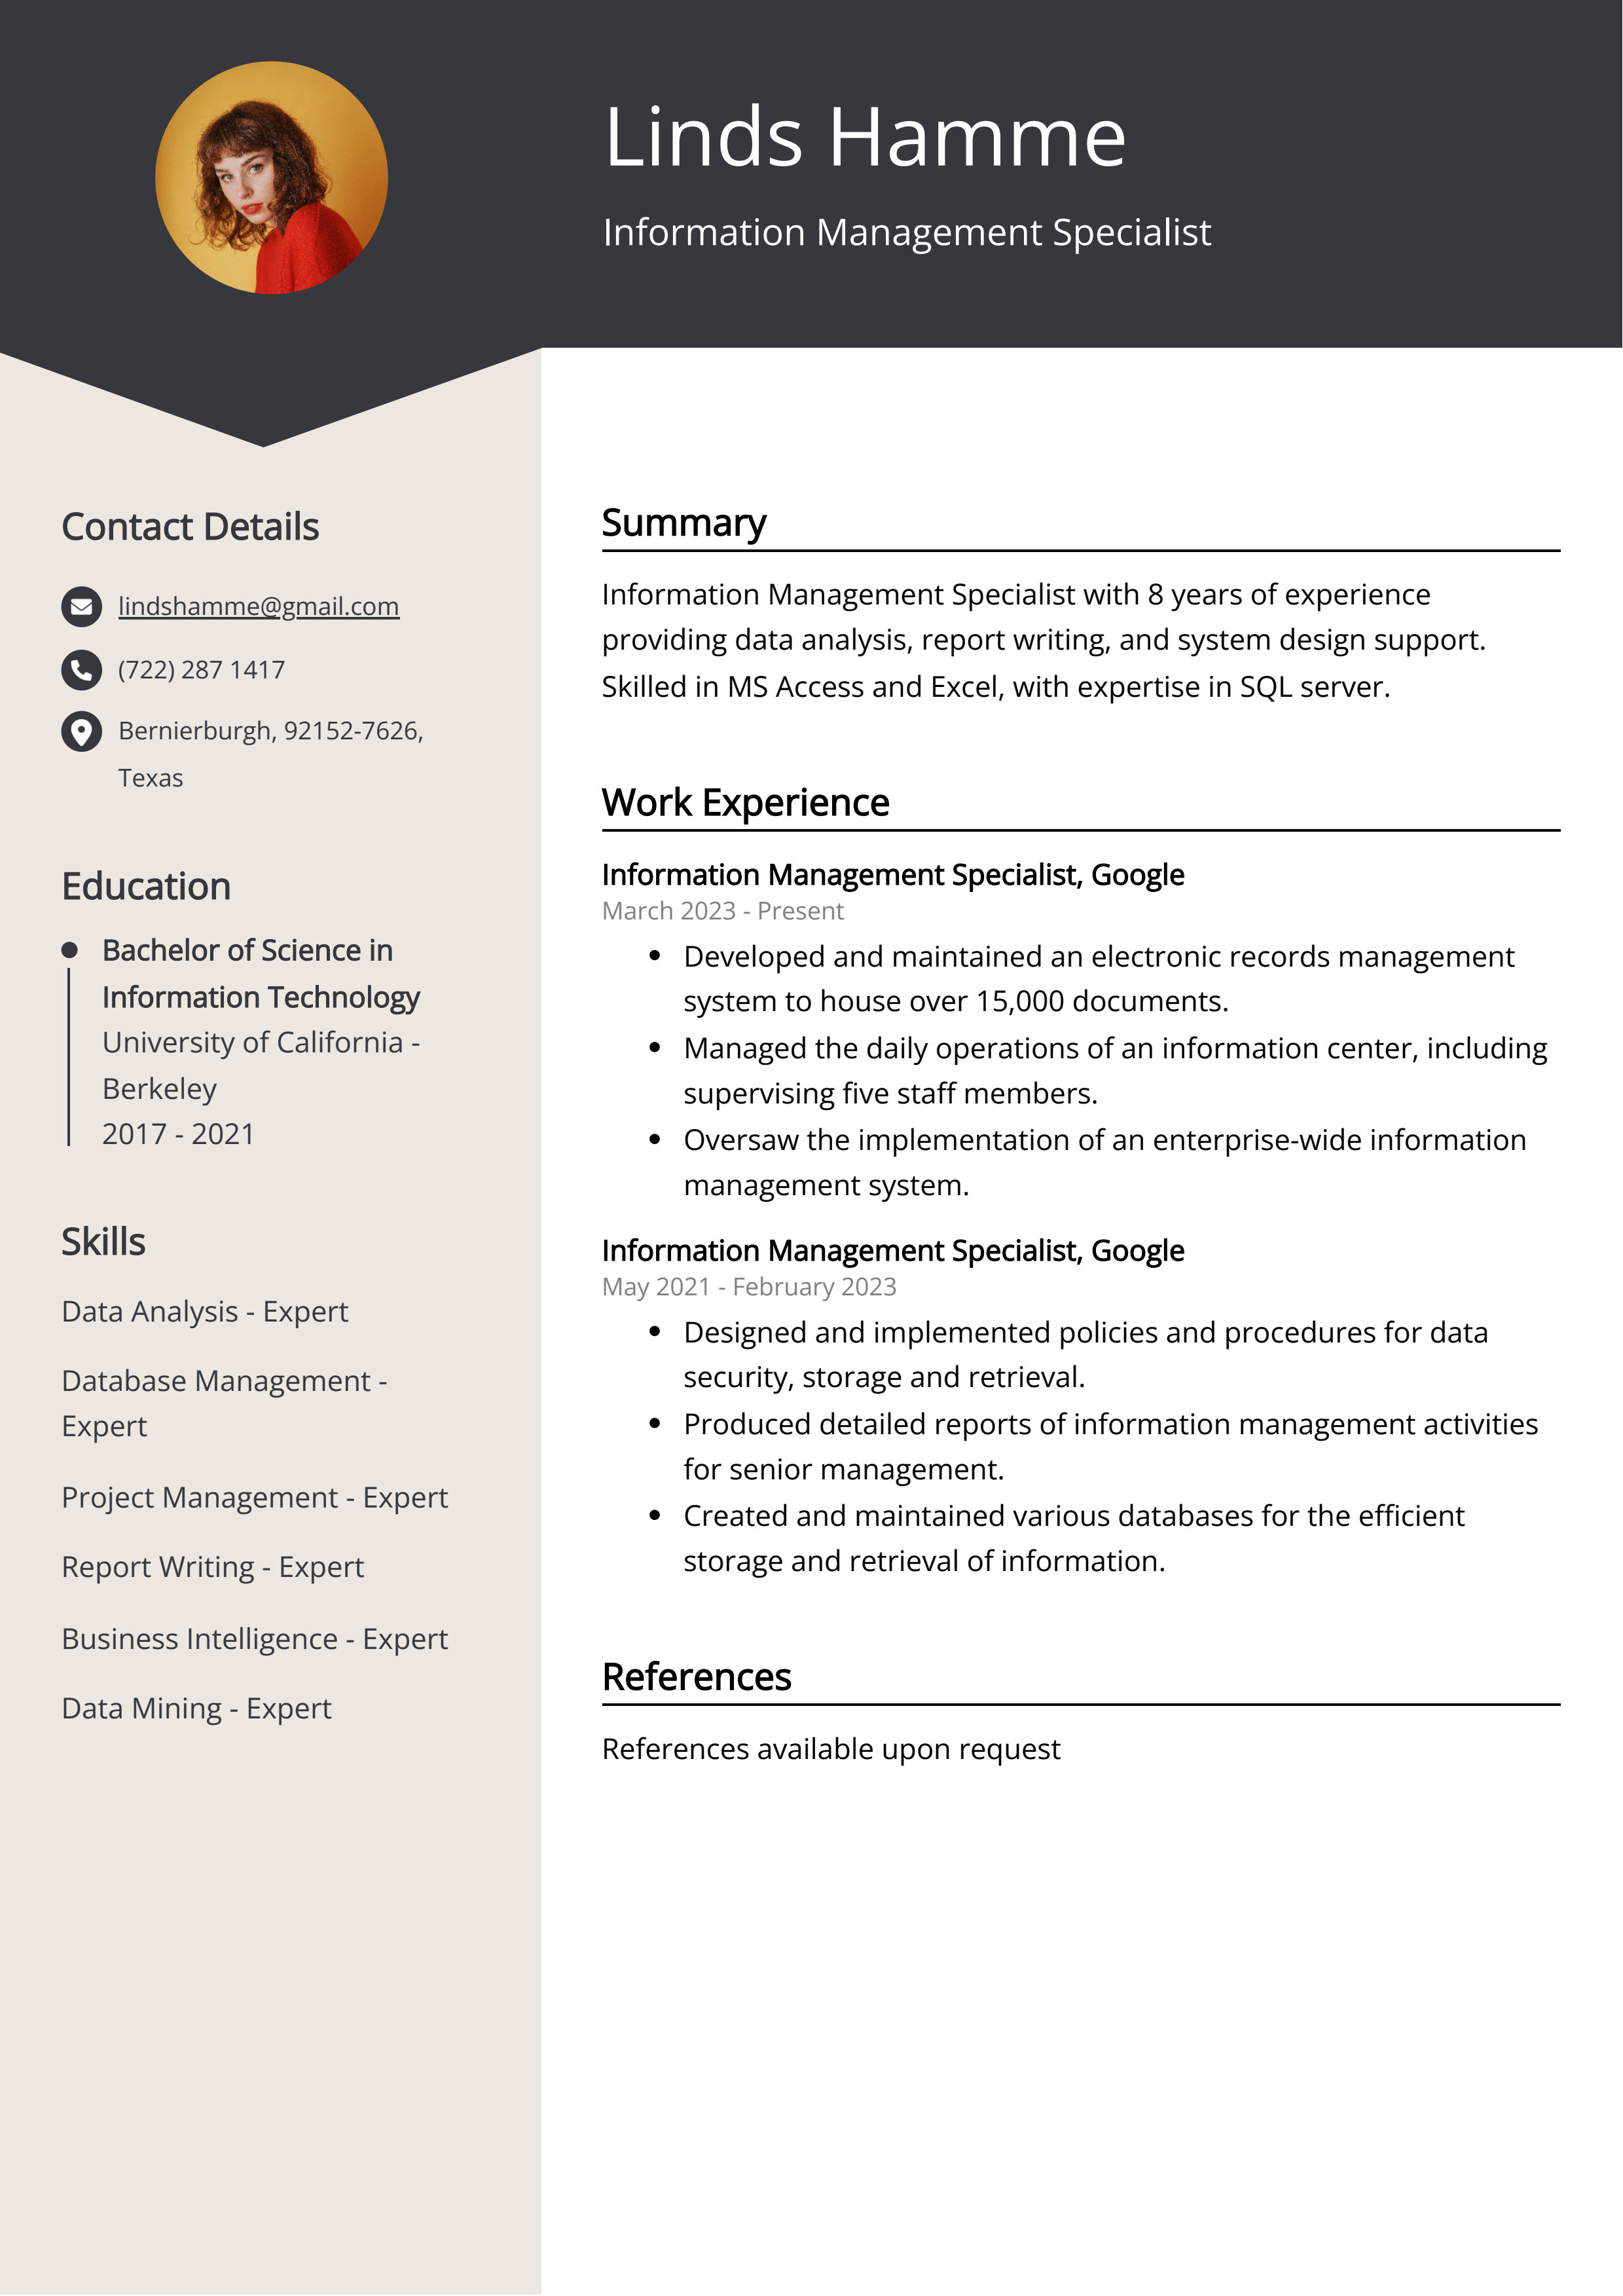 Information Management Specialist Resume Example